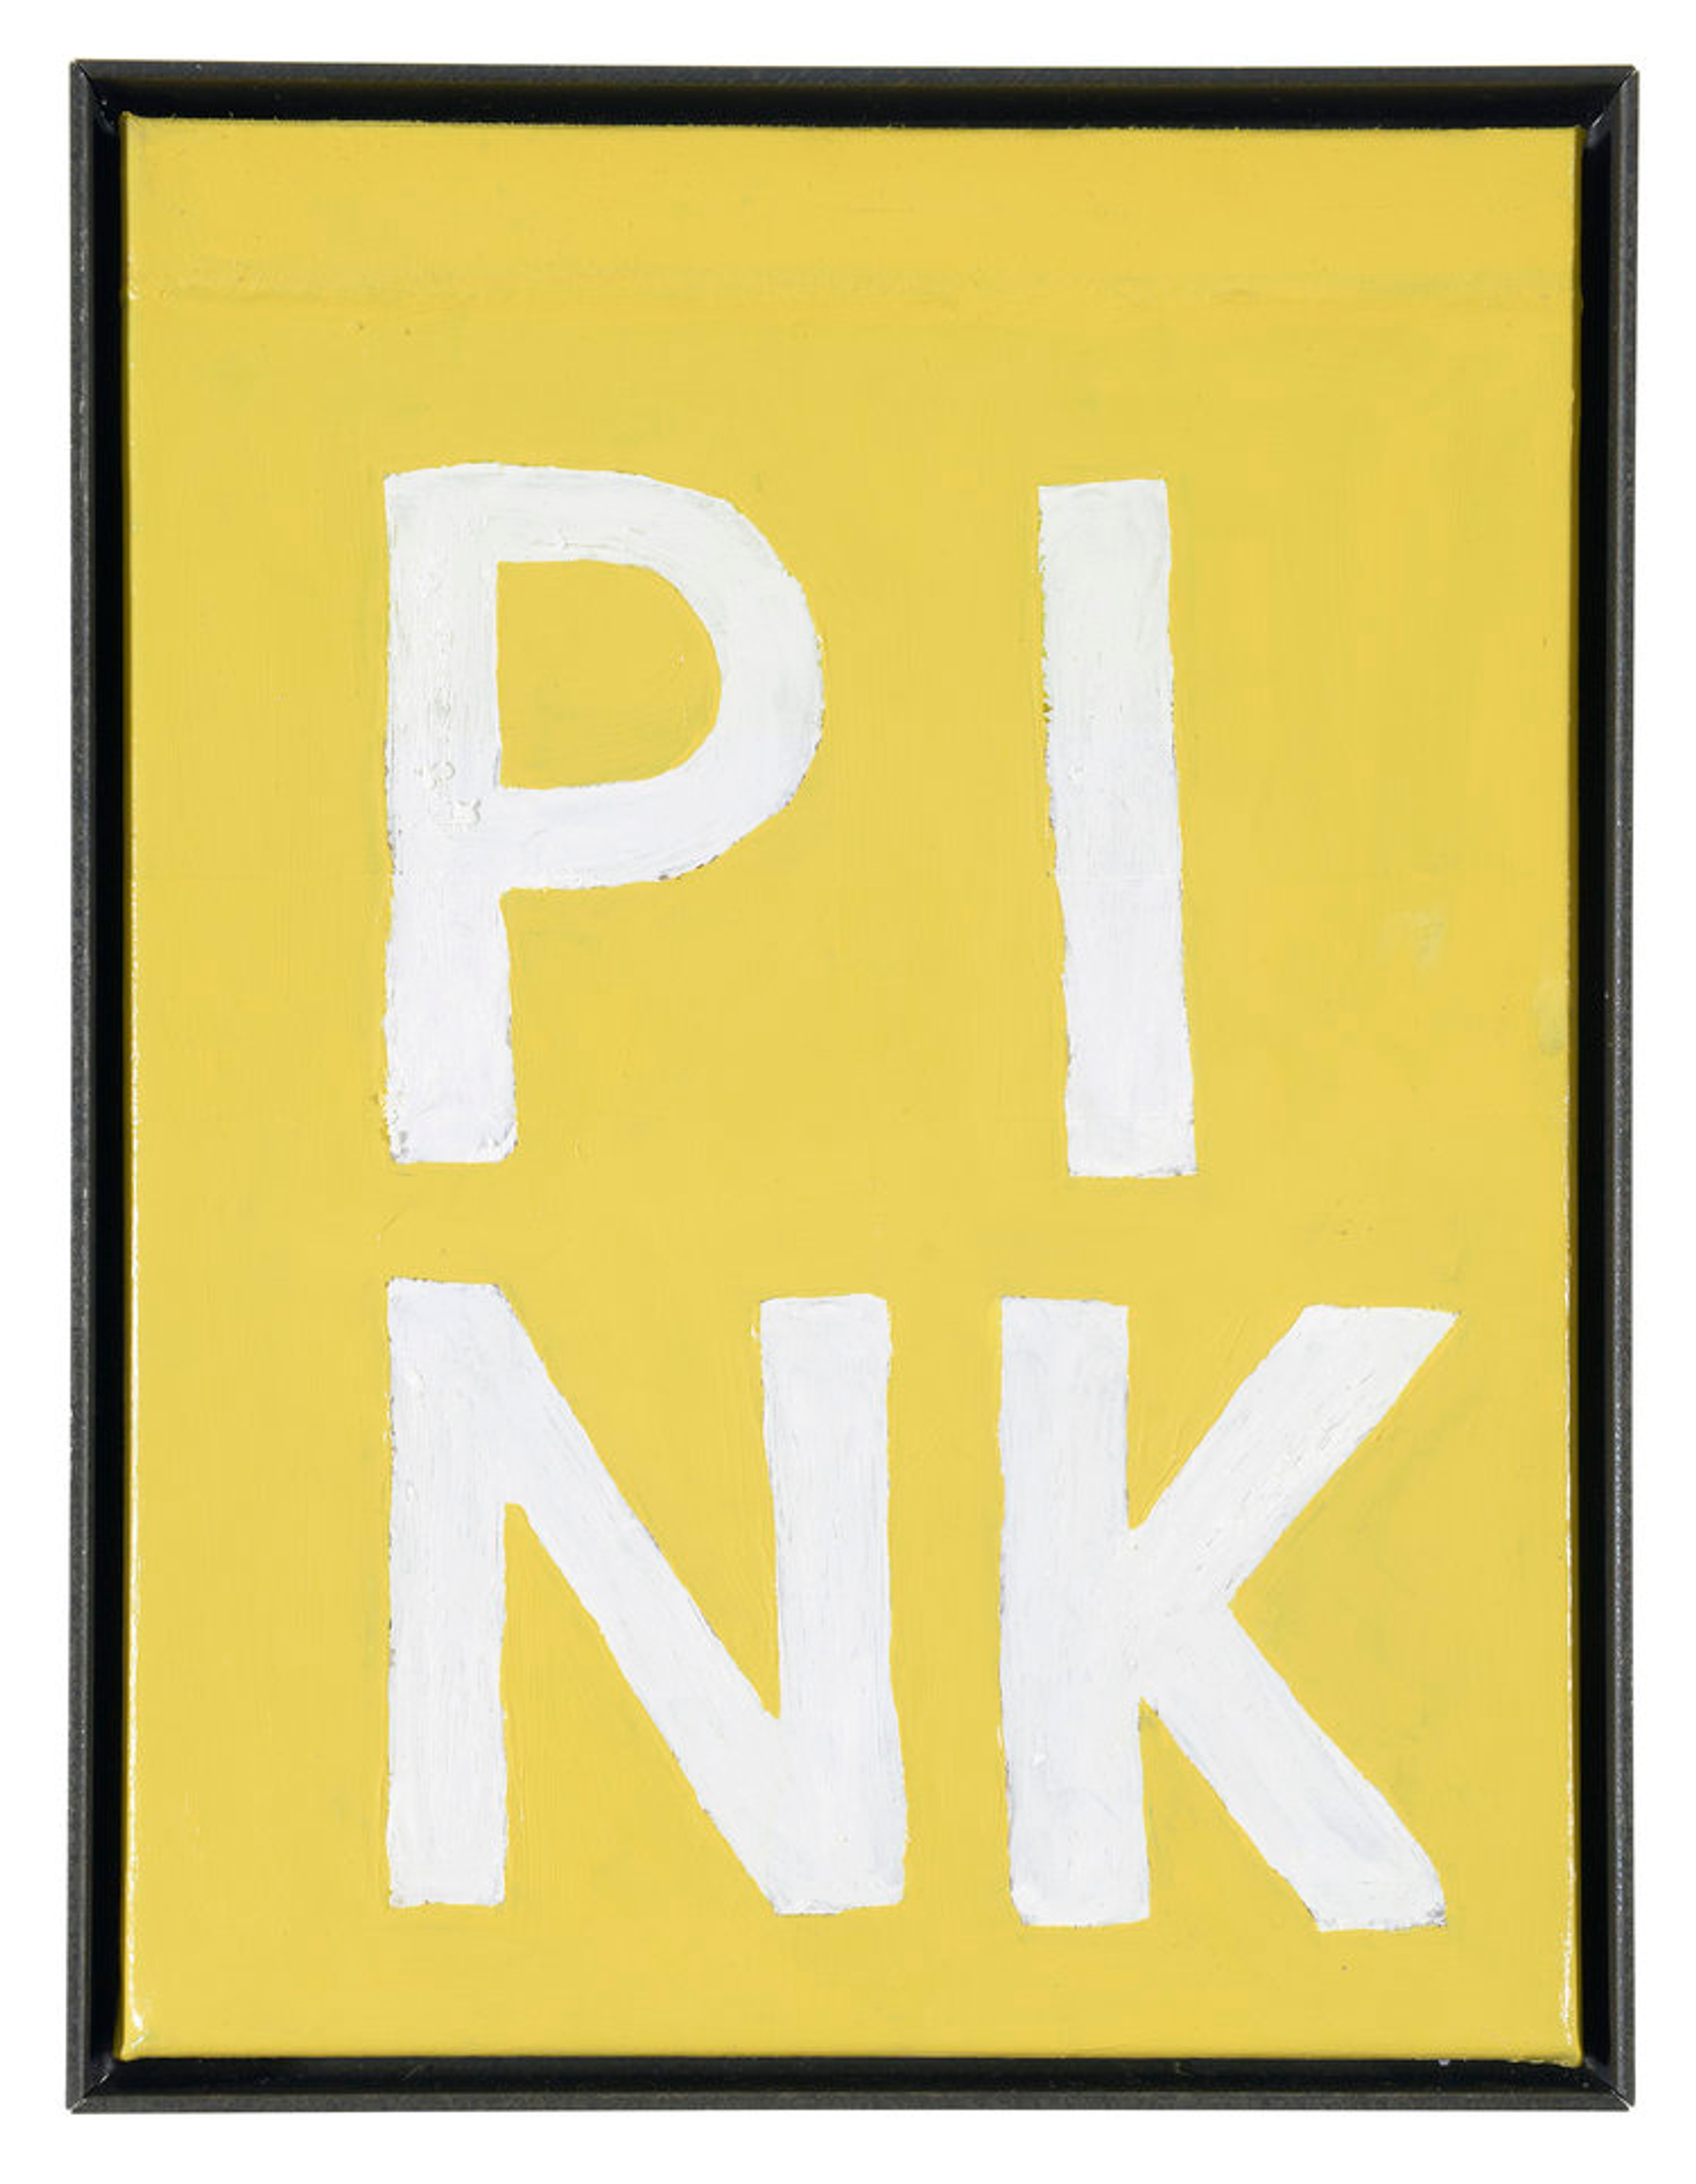 ART N MORE (Paul Bowler & Georg Weißbach), PINK (Four-letter words), 2016, Oil on canvas in artist's frame, 40 x 30 cm